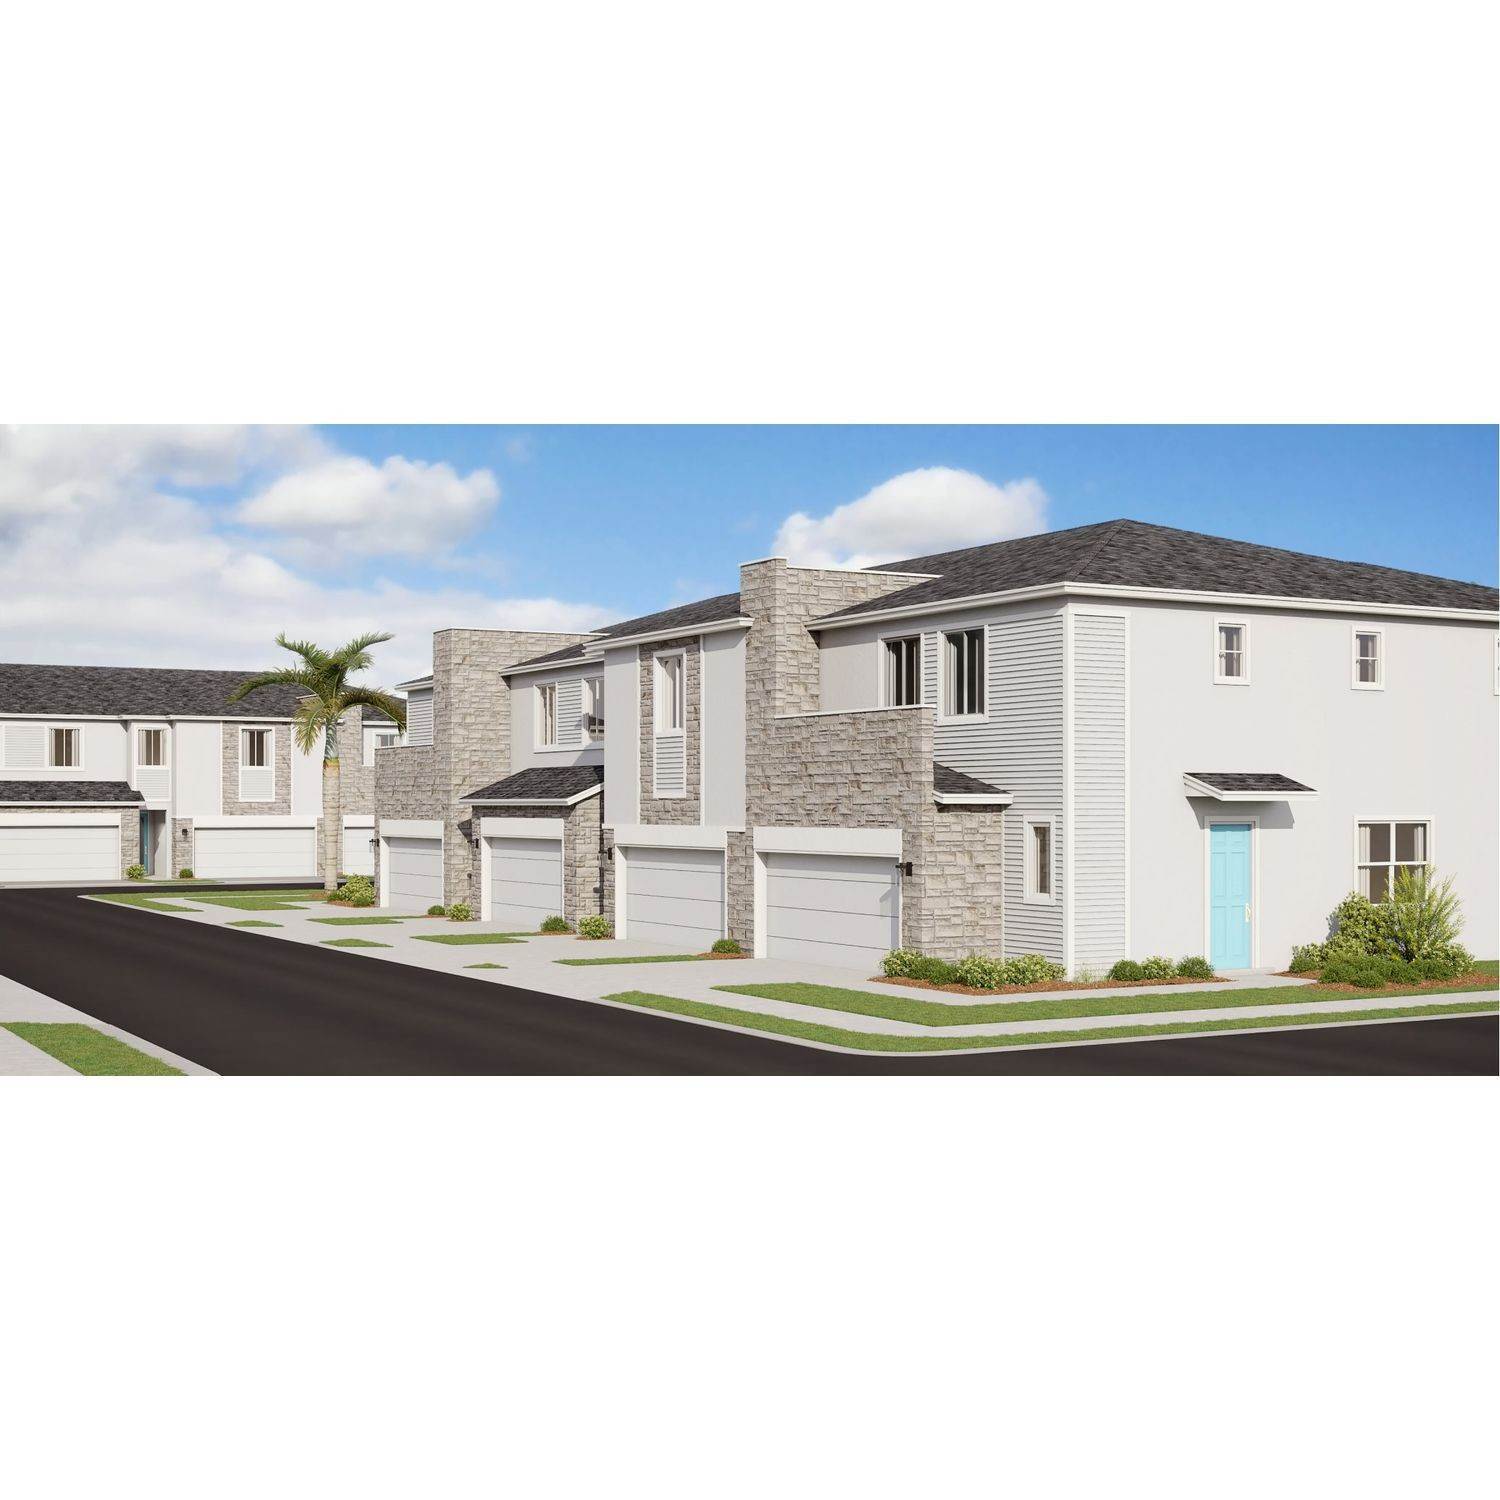 2. Champions Pointe - Champions Pointe Townhomes II xây dựng tại 224 Nine Iron Drive, Davenport, FL 33896